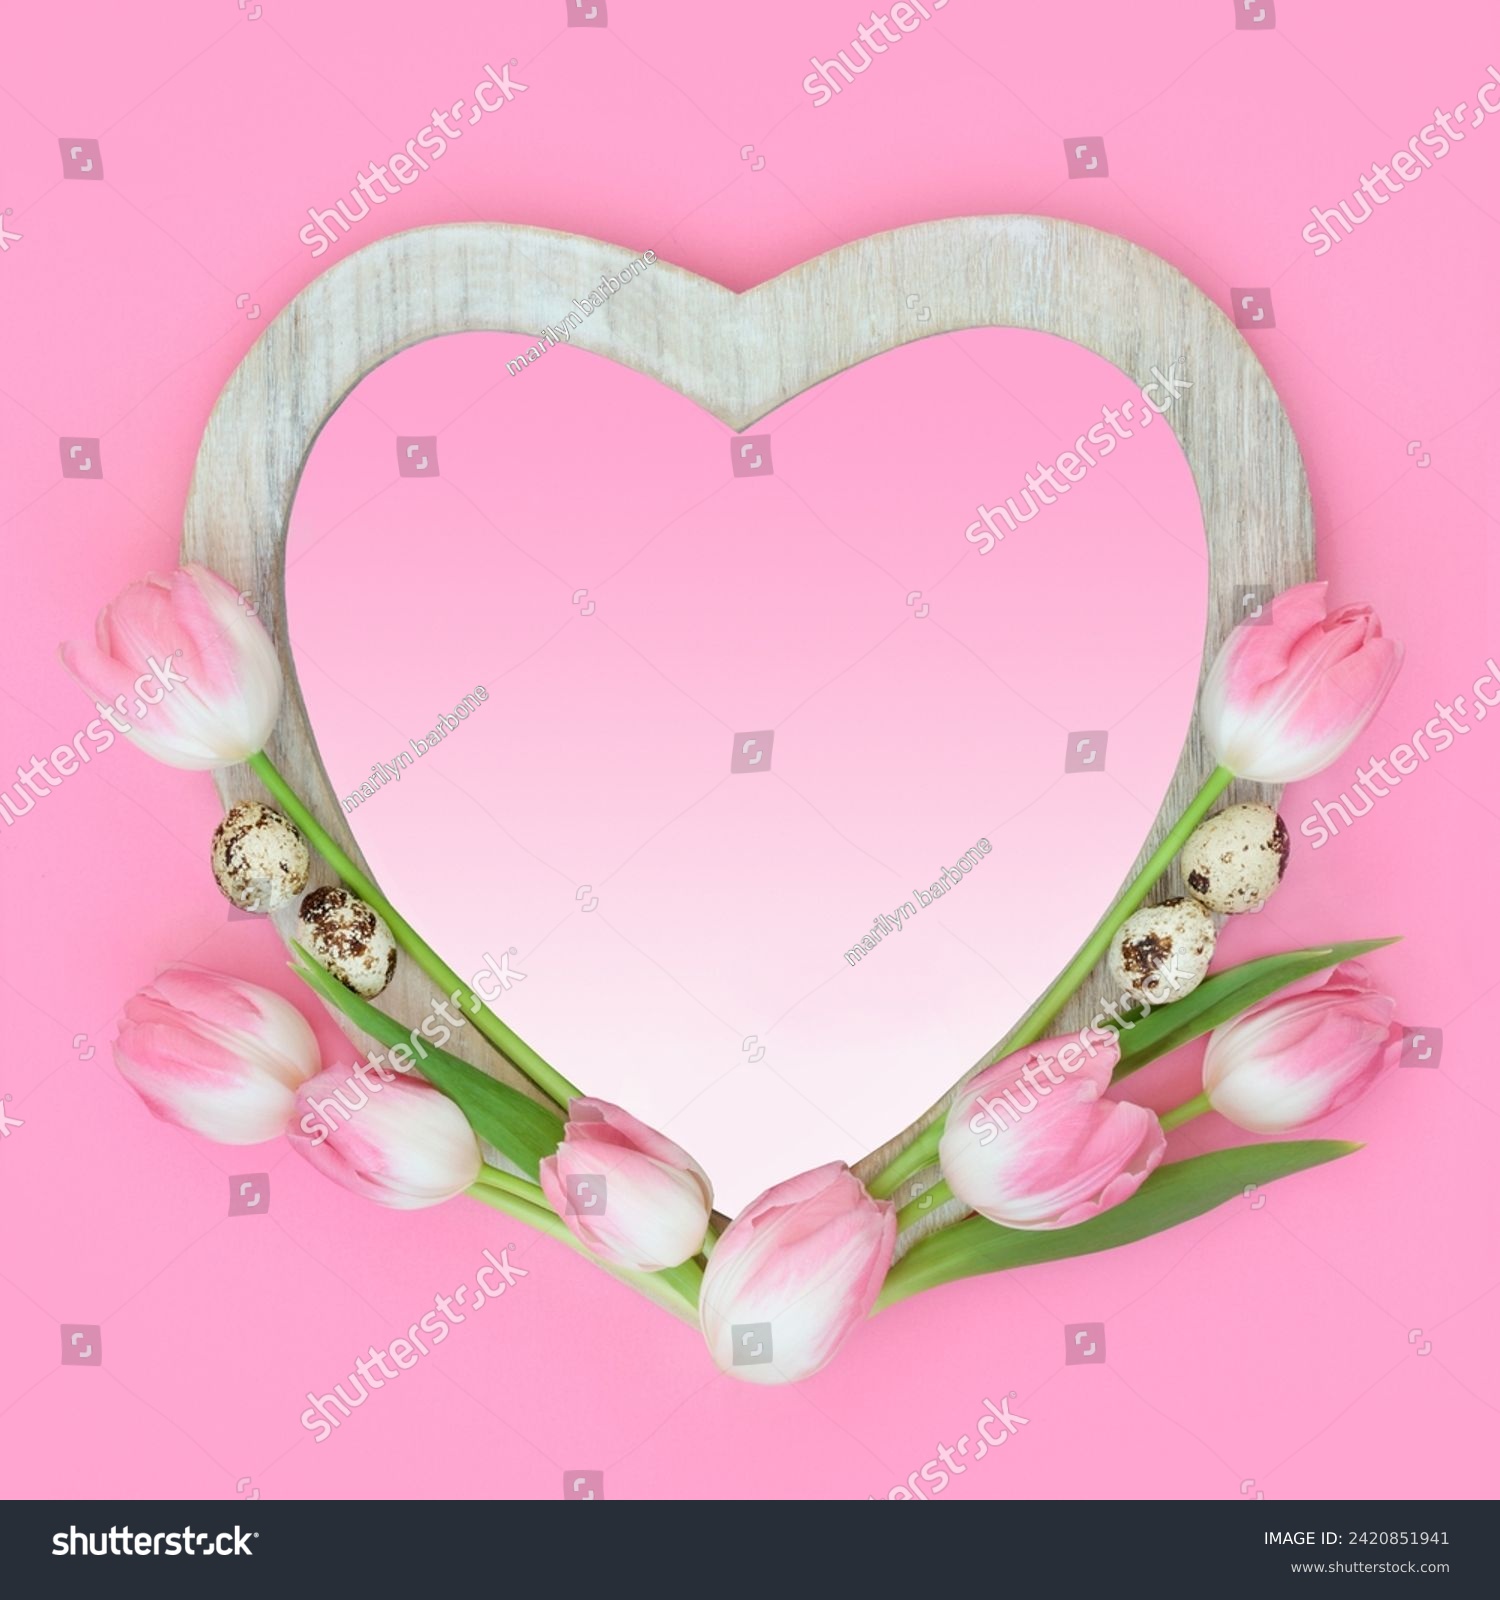 Tulip flower and quail egg abstract heart shape frame with gradient insert. Spring and Easter minimal floral nature food design on pastel pink background. #2420851941